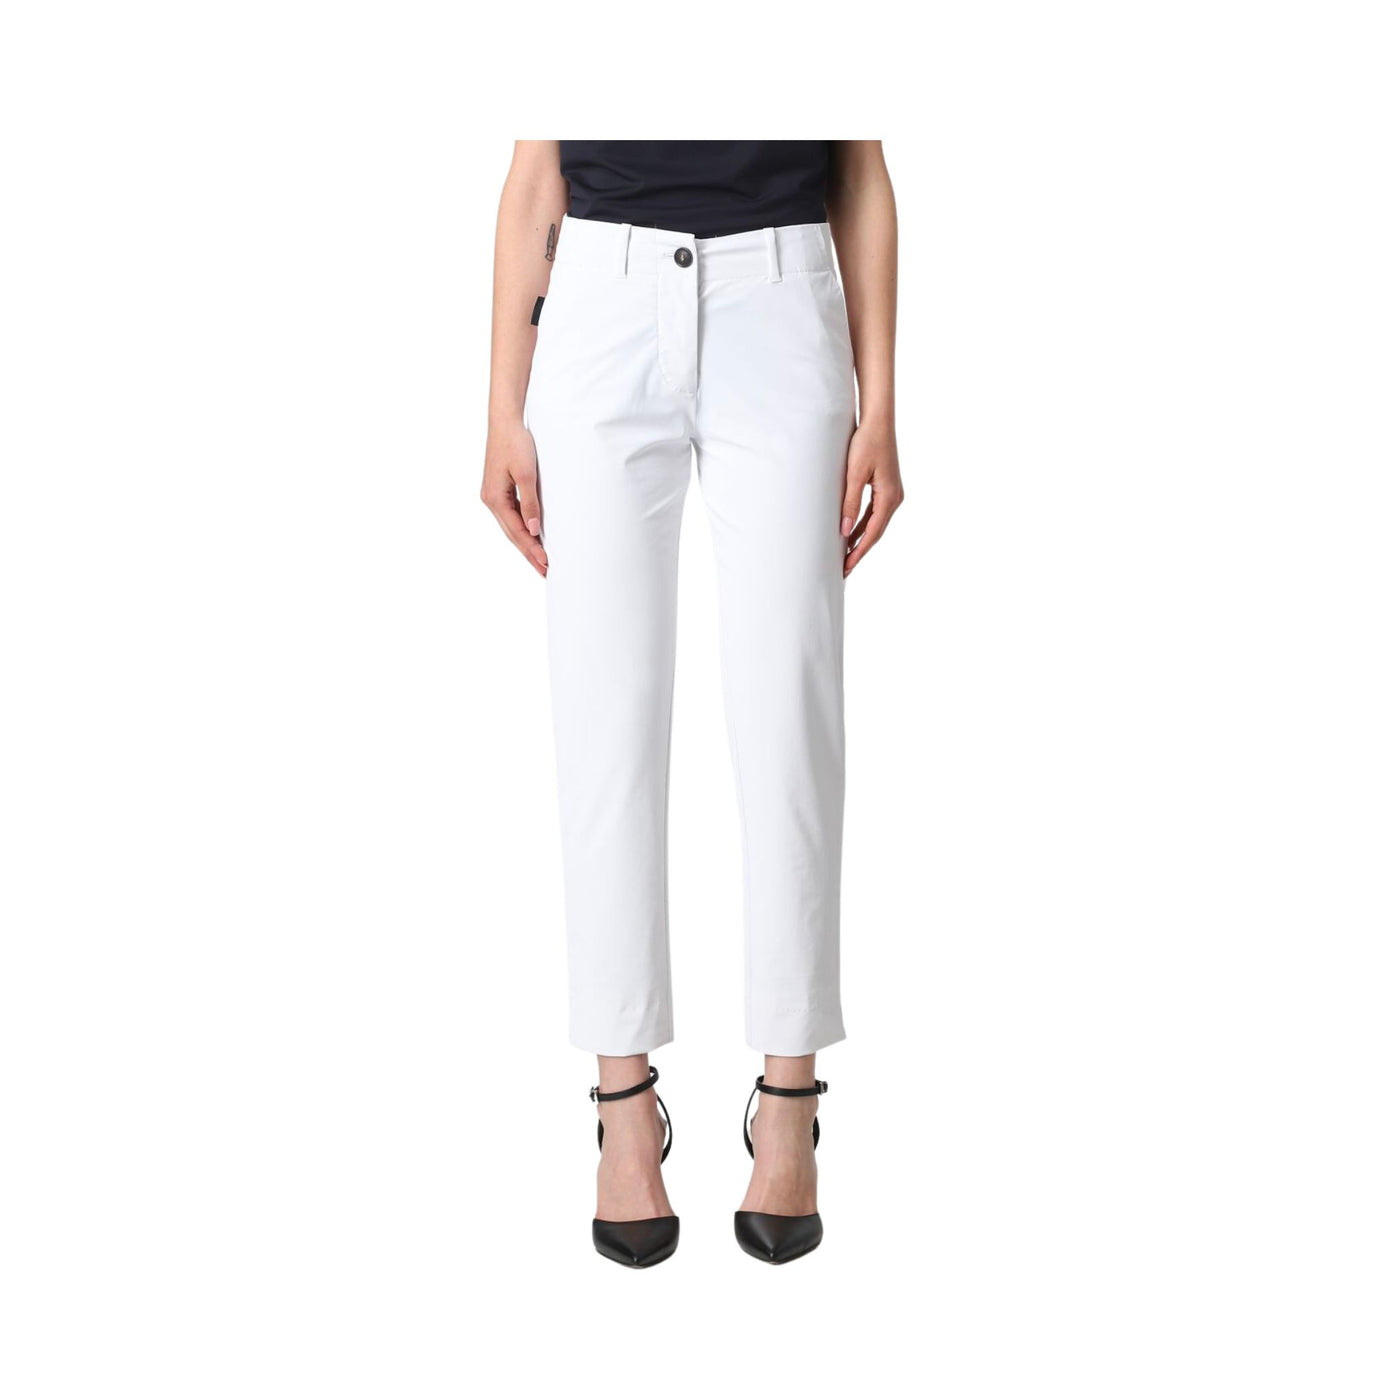 Vintage style women's trousers